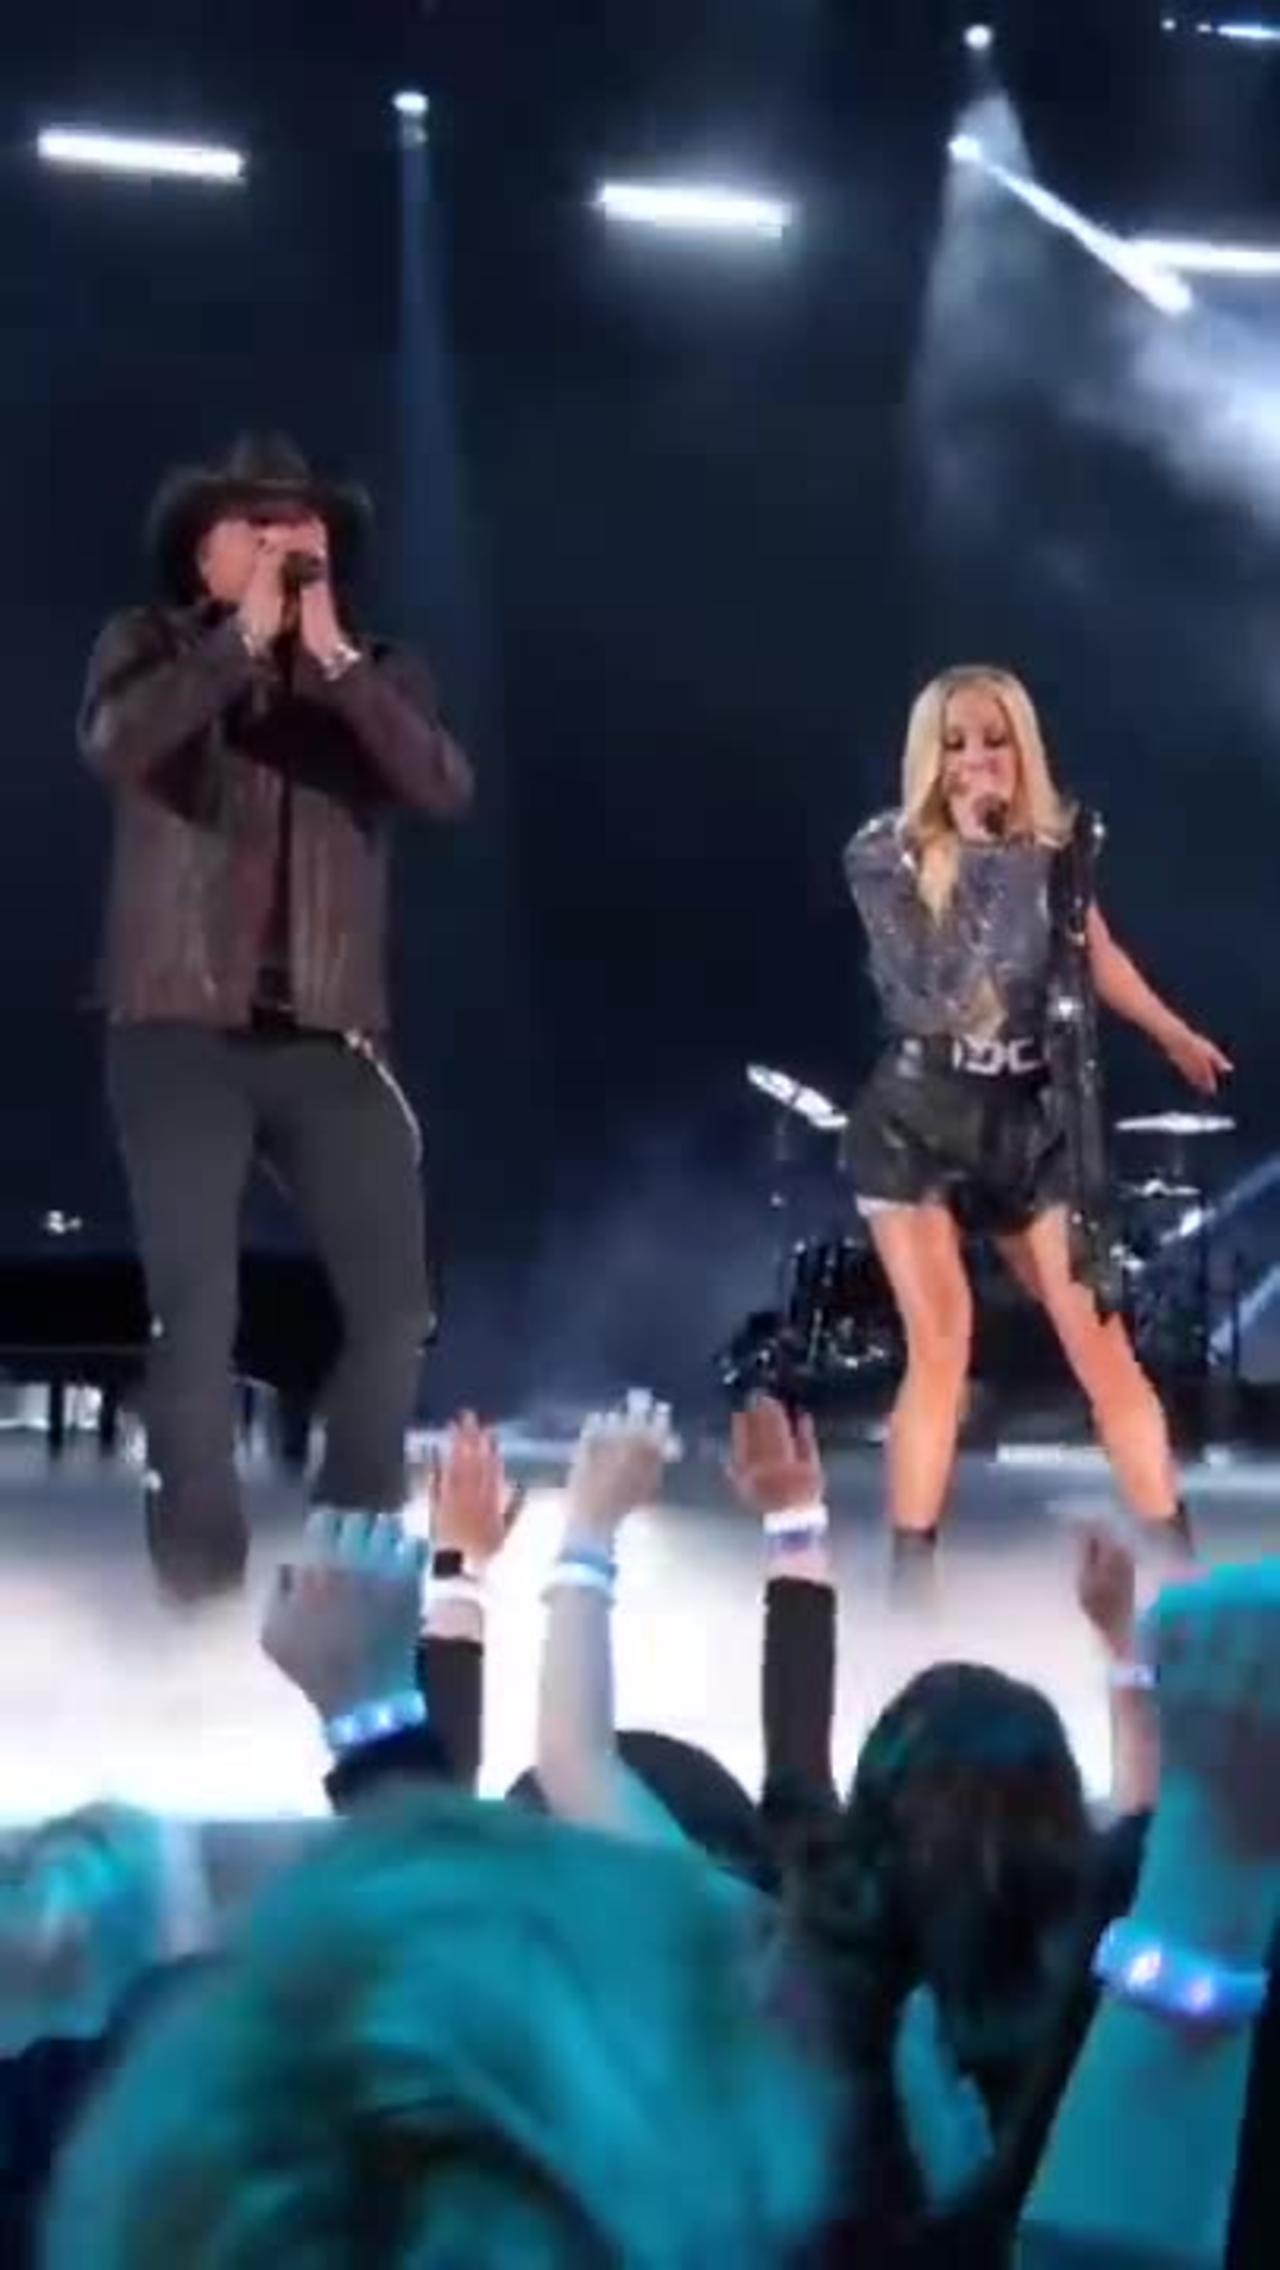 Jason and Carrie Underwood performed their Single Of The Year #IfIDidntLove You on the ACM